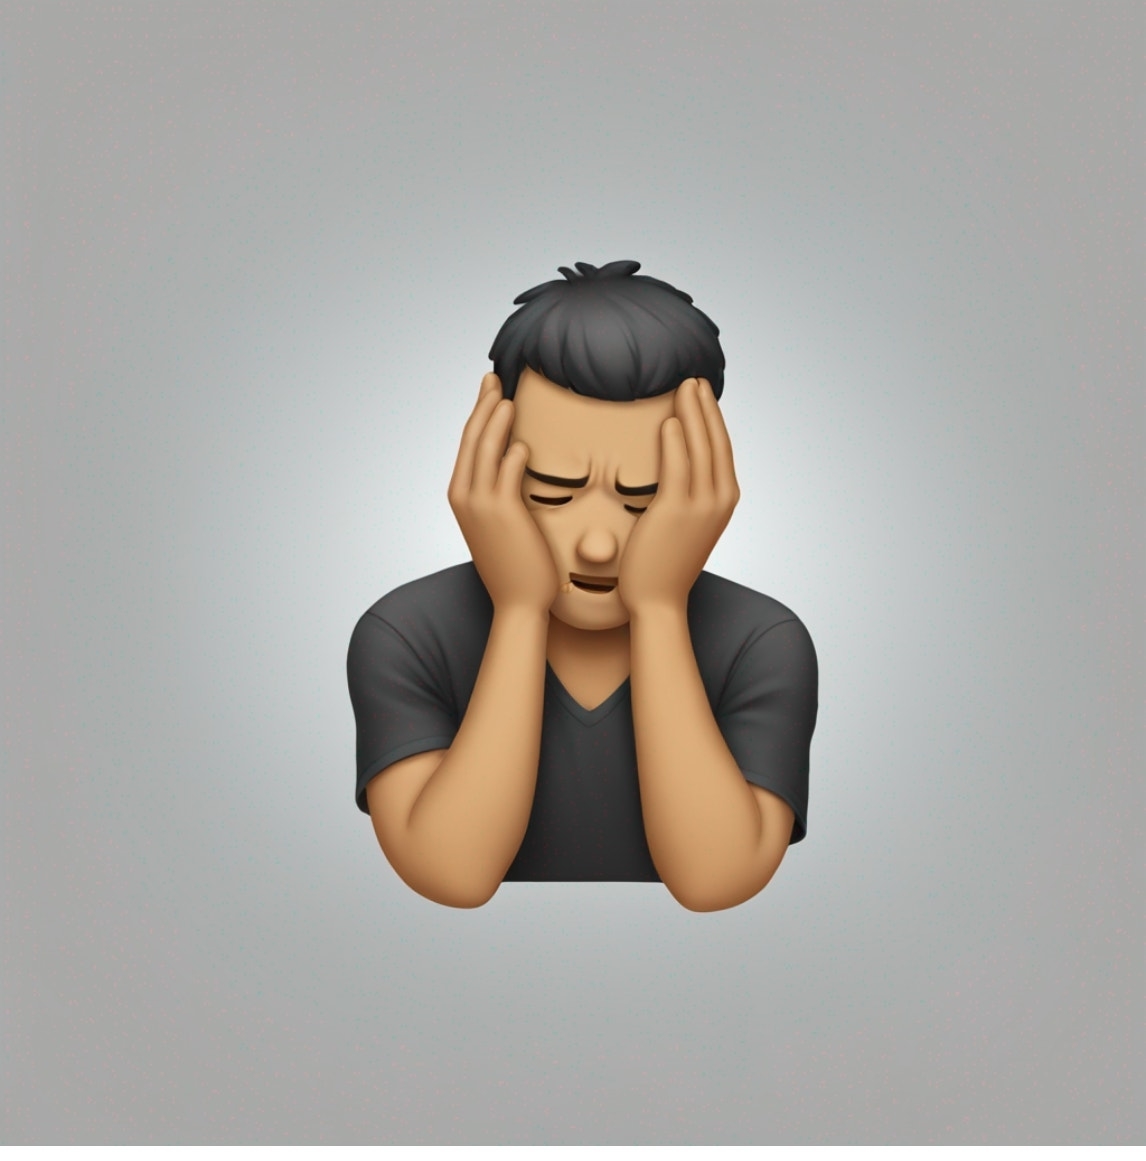 Emoji showing a person with hands on face in a gesture of disbelief or exasperation